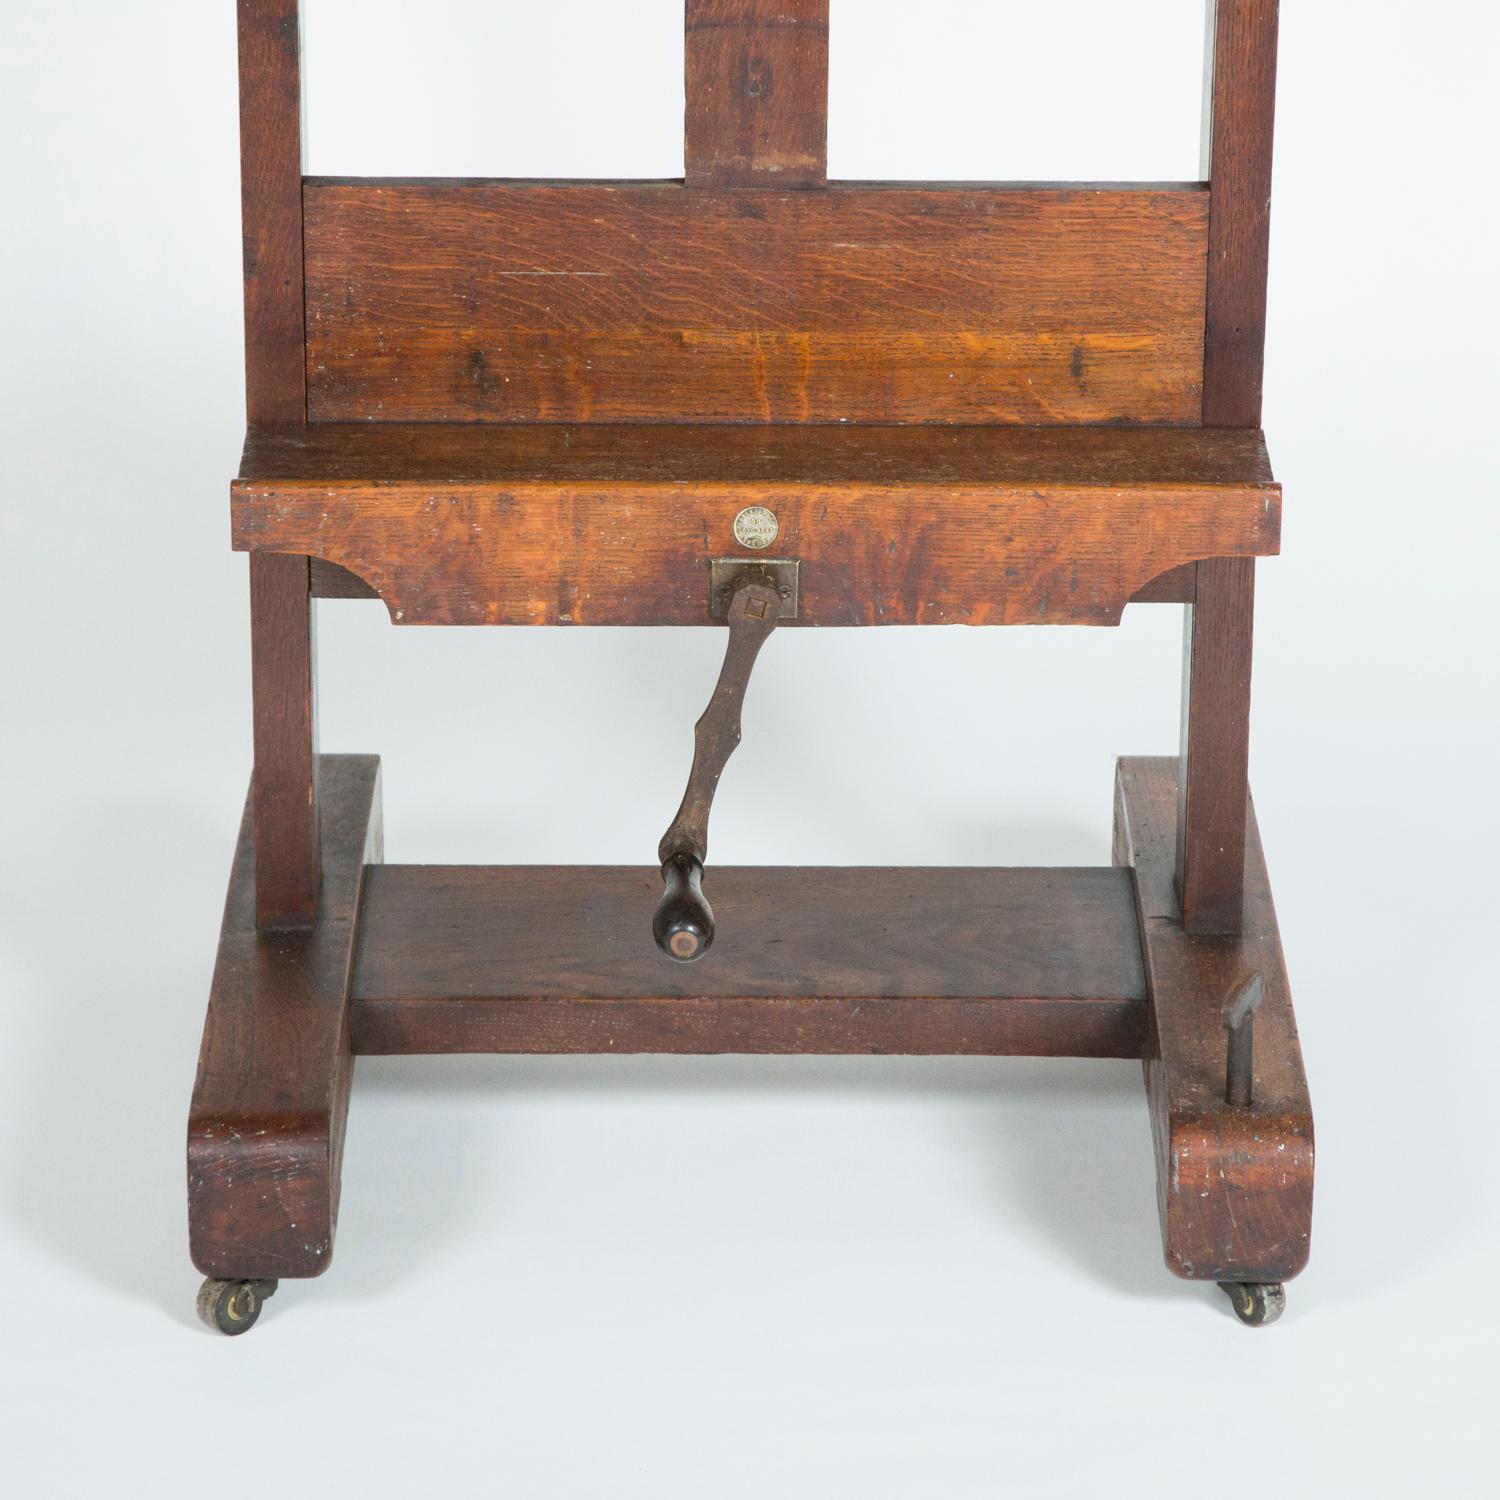 19th Century Easel by Roberson & Co. of Long Acre, London, circa 1890